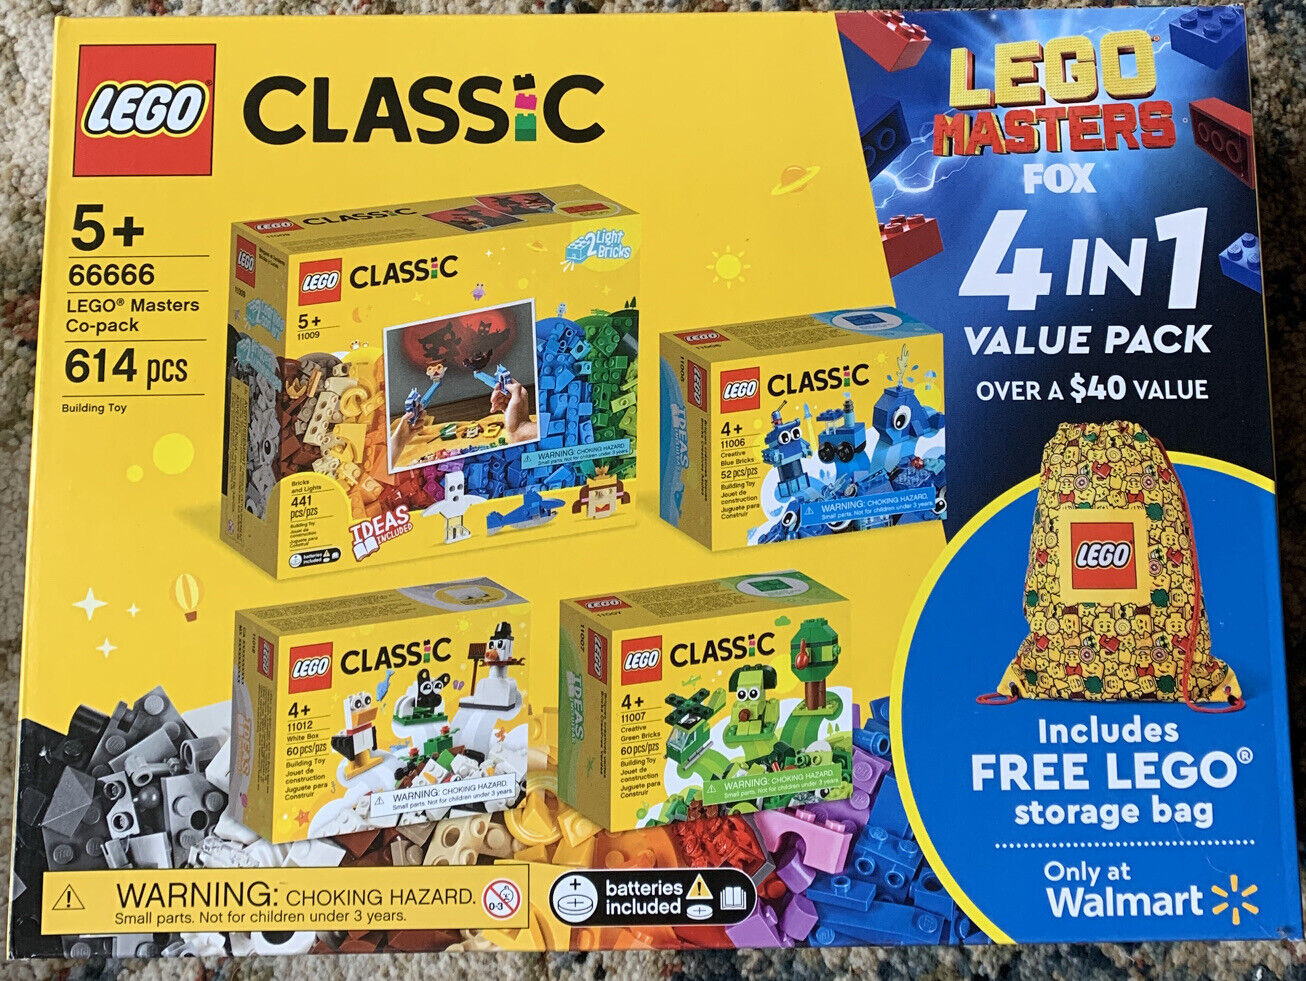 LEGO 66666 LEGO Masters Co-pack 614pcs 4 in 1 Value Pack with Storage Bag New